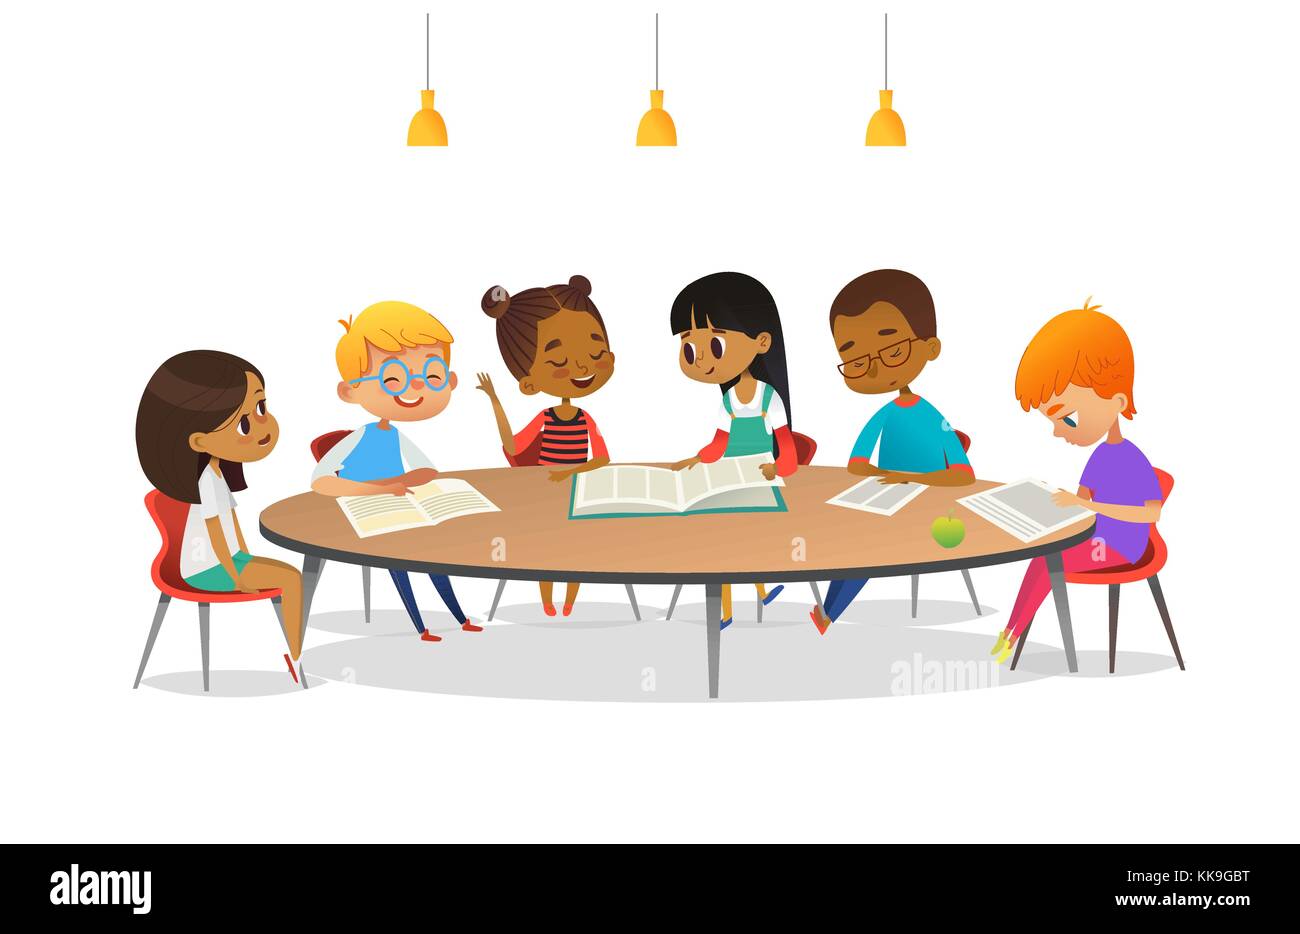 Boys and girls sitting around round table, studying, reading books and discuss them. Kids talking to each other at school library. Cartoon vector illustration for banner, poster, advertisement. Stock Vector